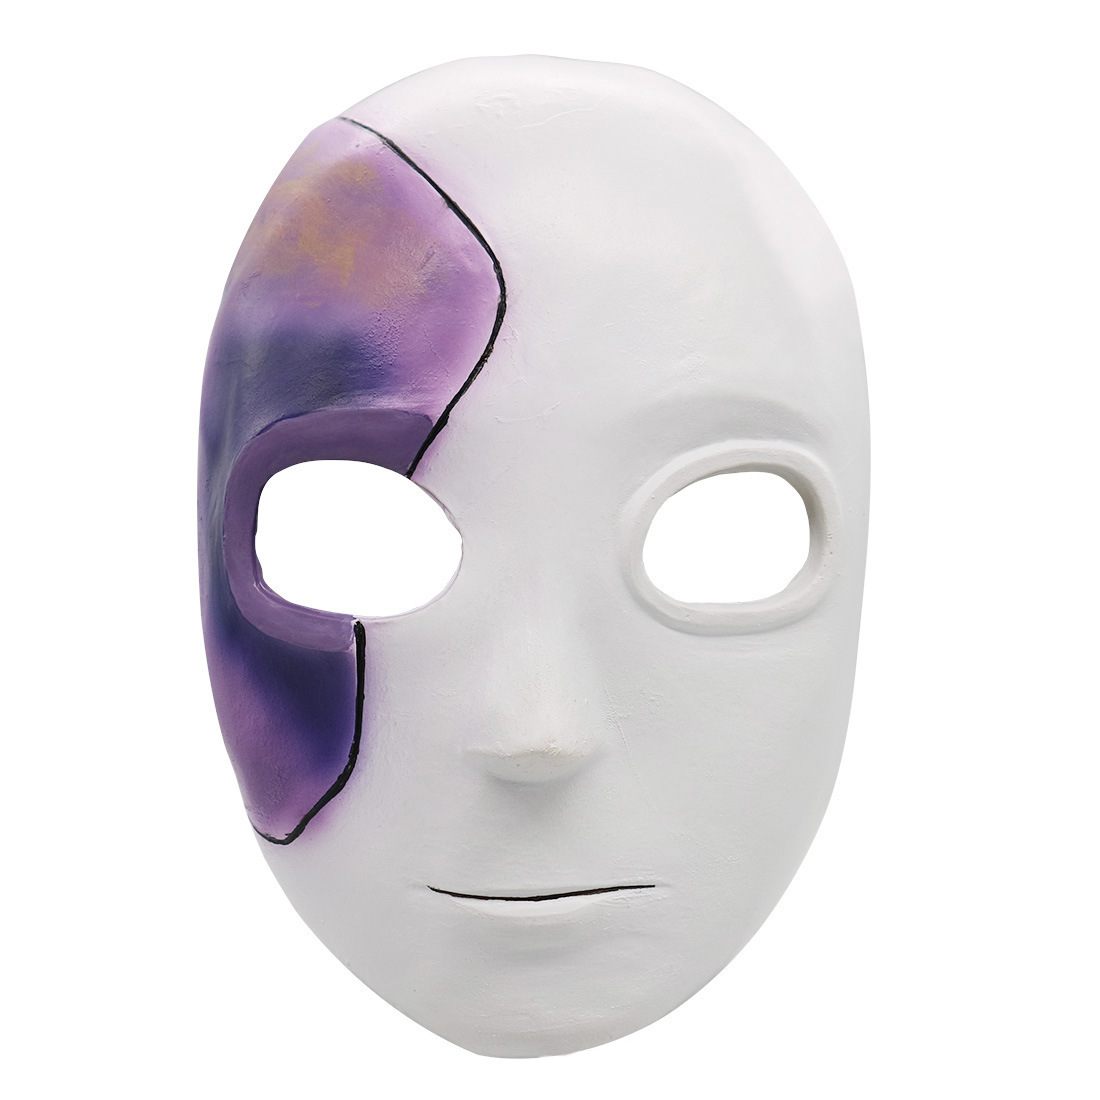 Sally Face Mask HALLOWEEN Sally Face Cosplay Mask Mask Replica Mask Costume  Hand Painted With Straps 